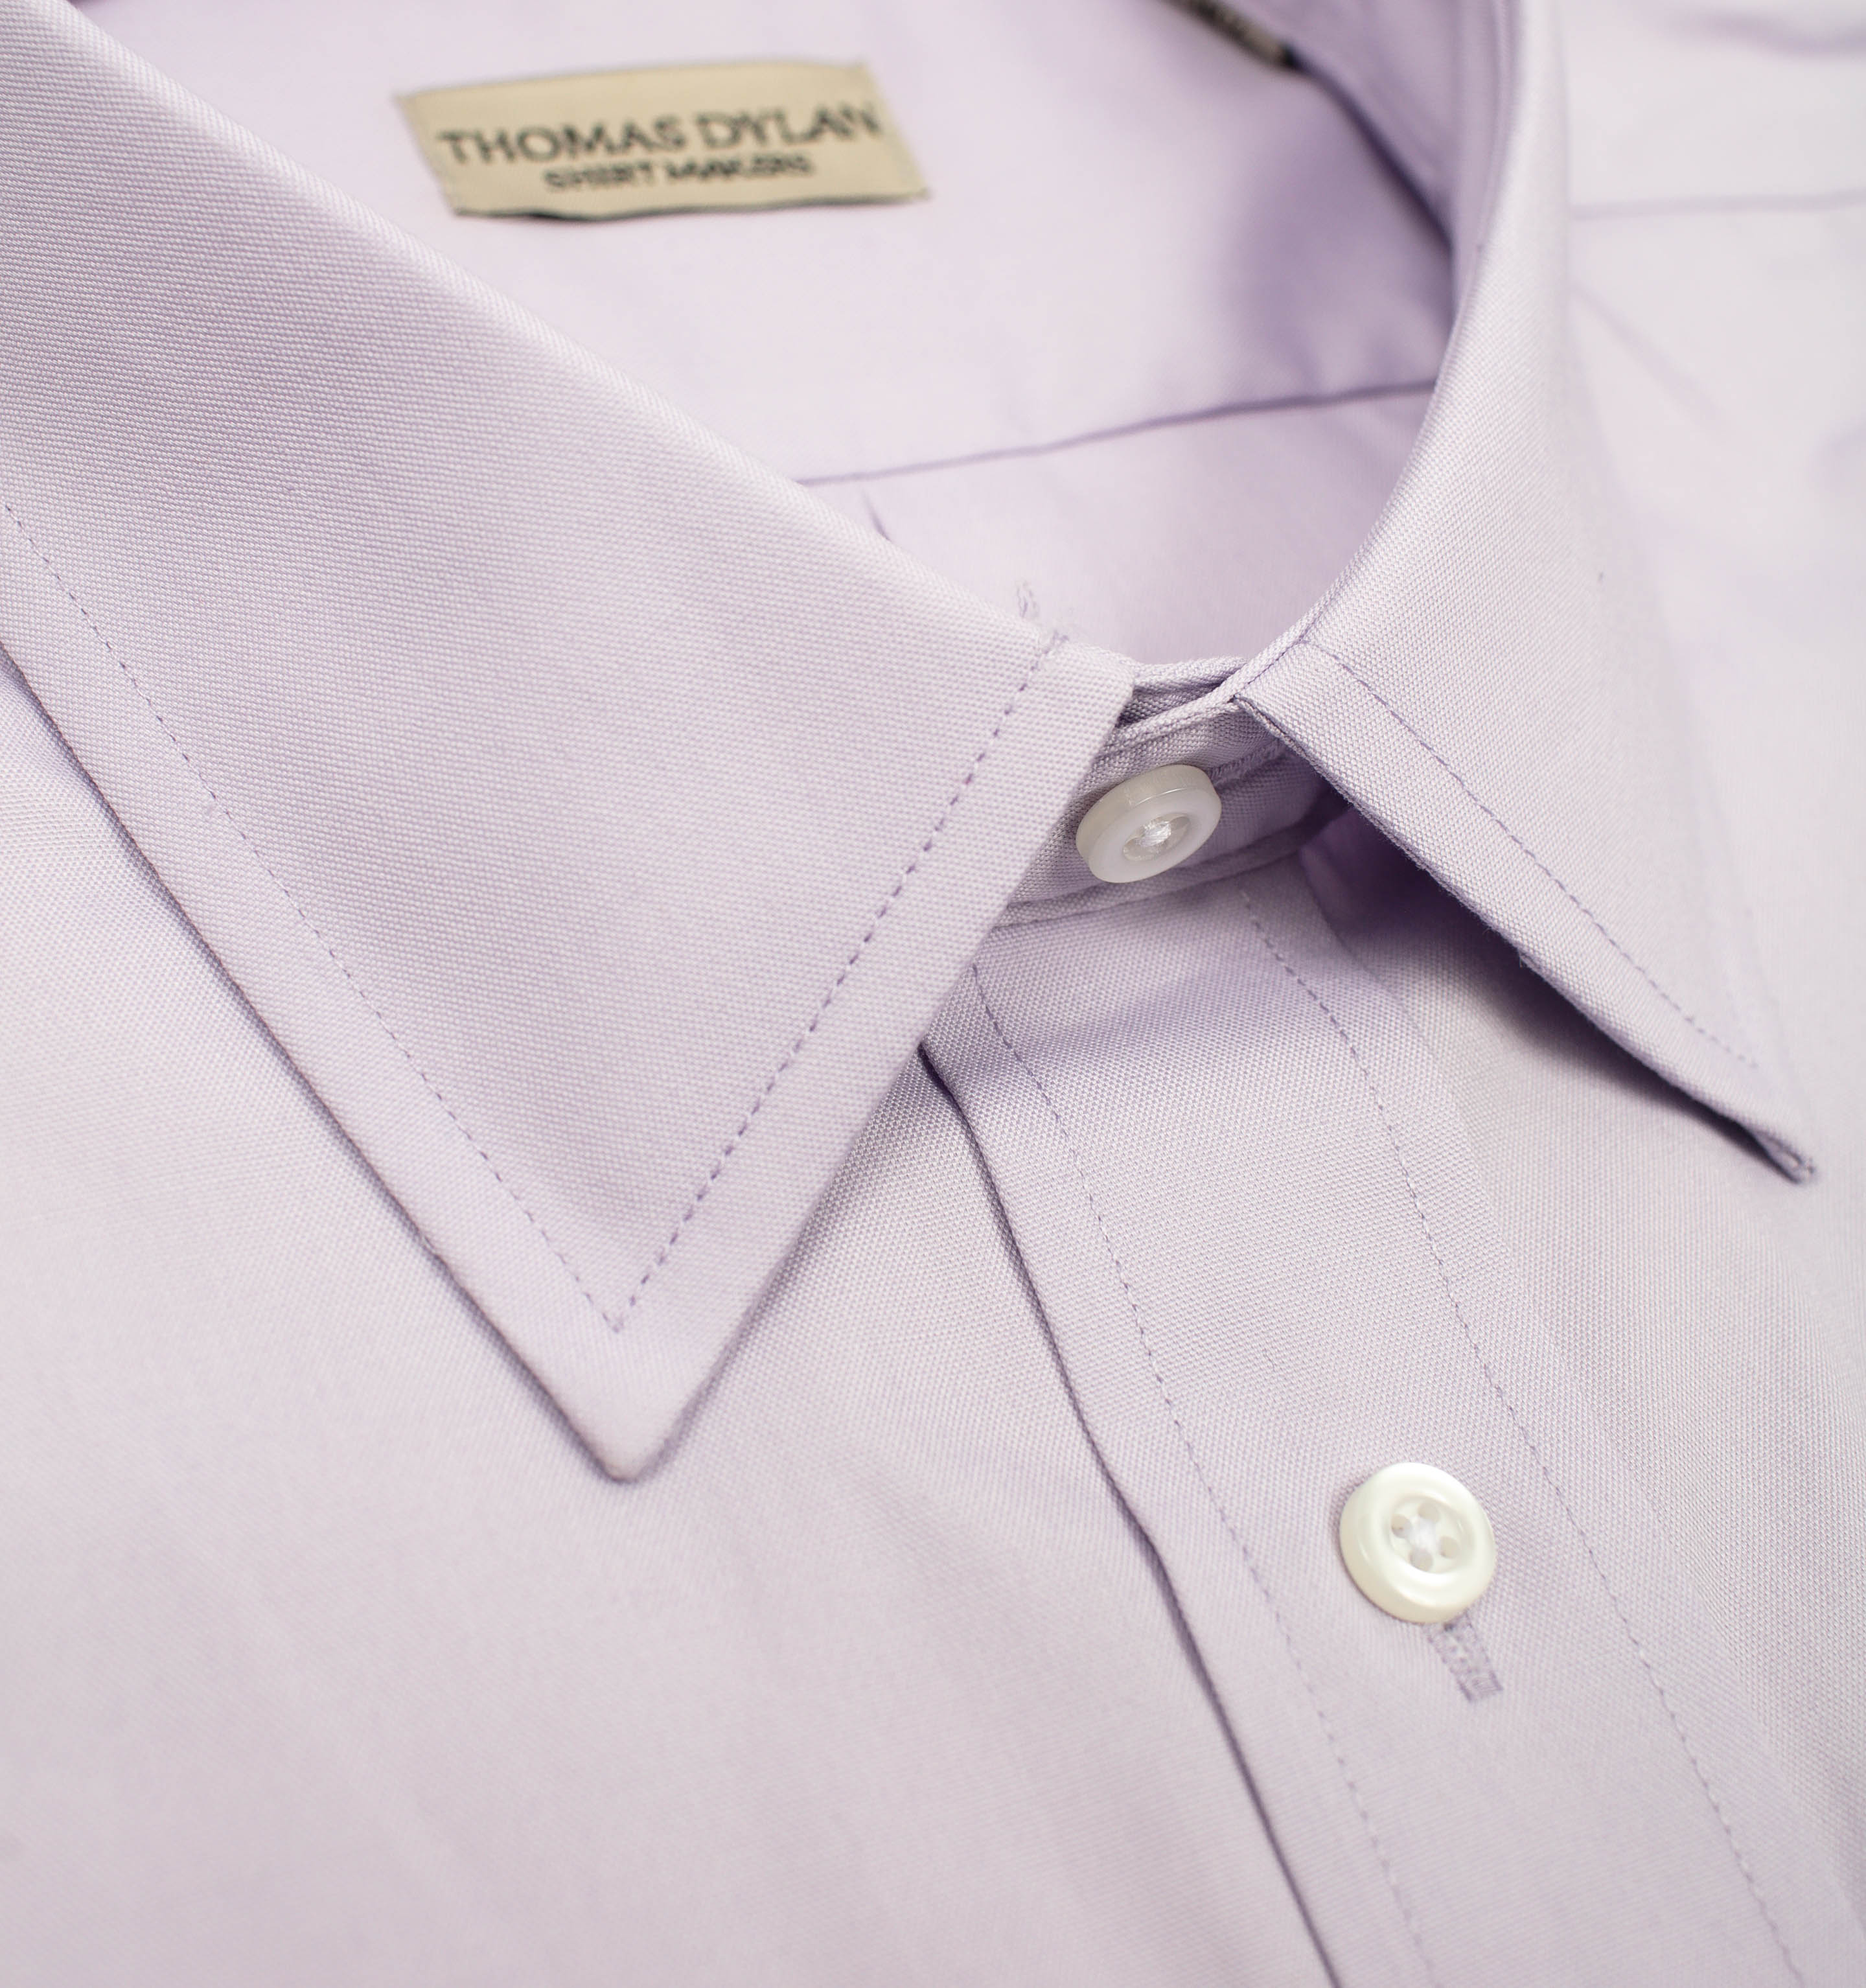 086 TF SC - Thomas Dylan Lavender Tailored Fit Spread Collar